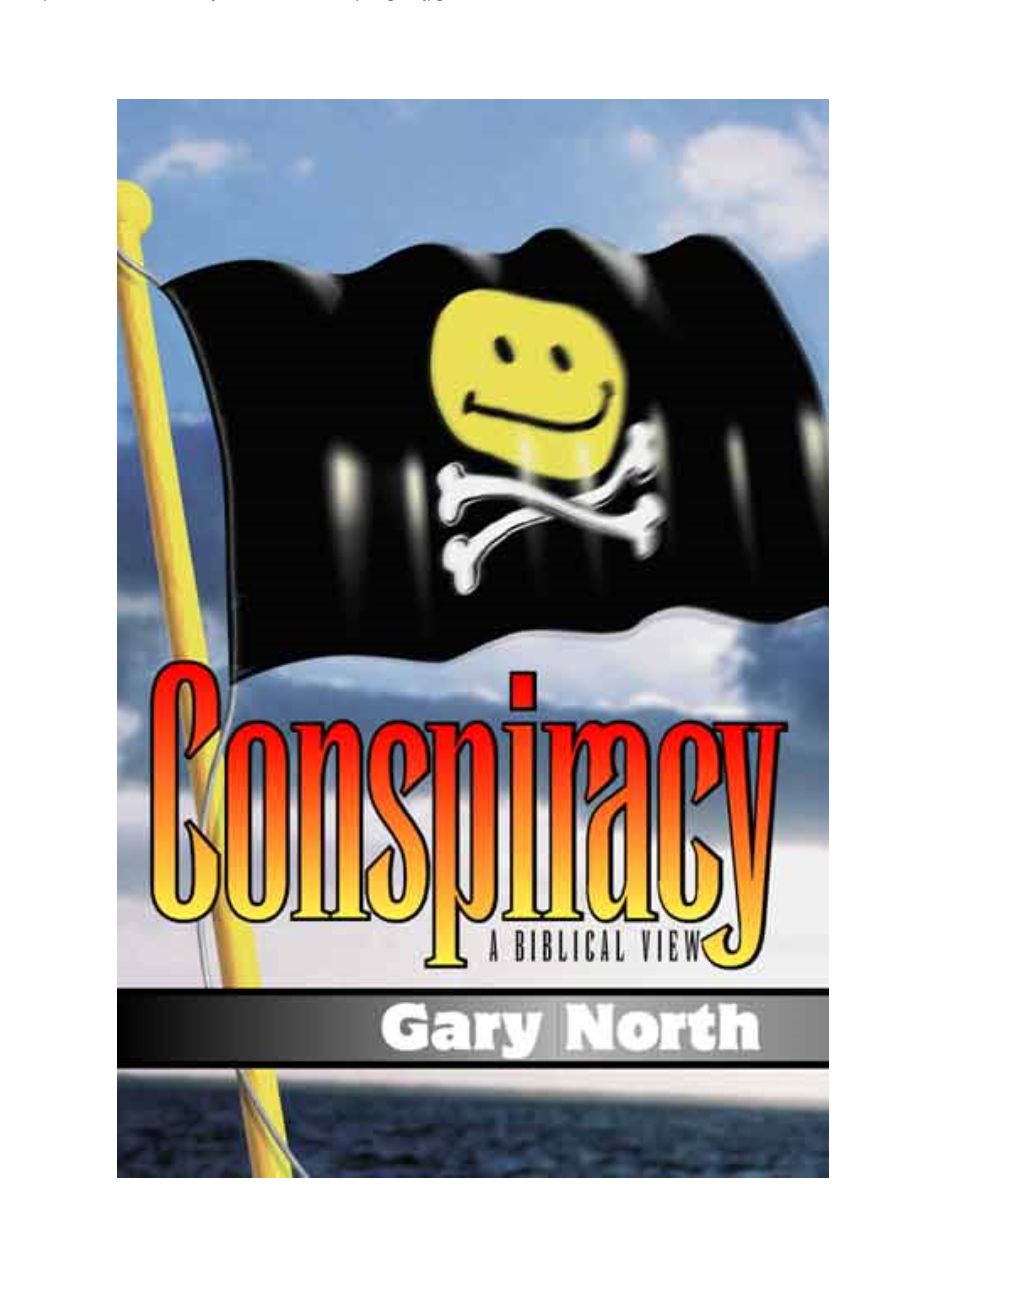 Conspiracy: a Biblical View, by Gary North